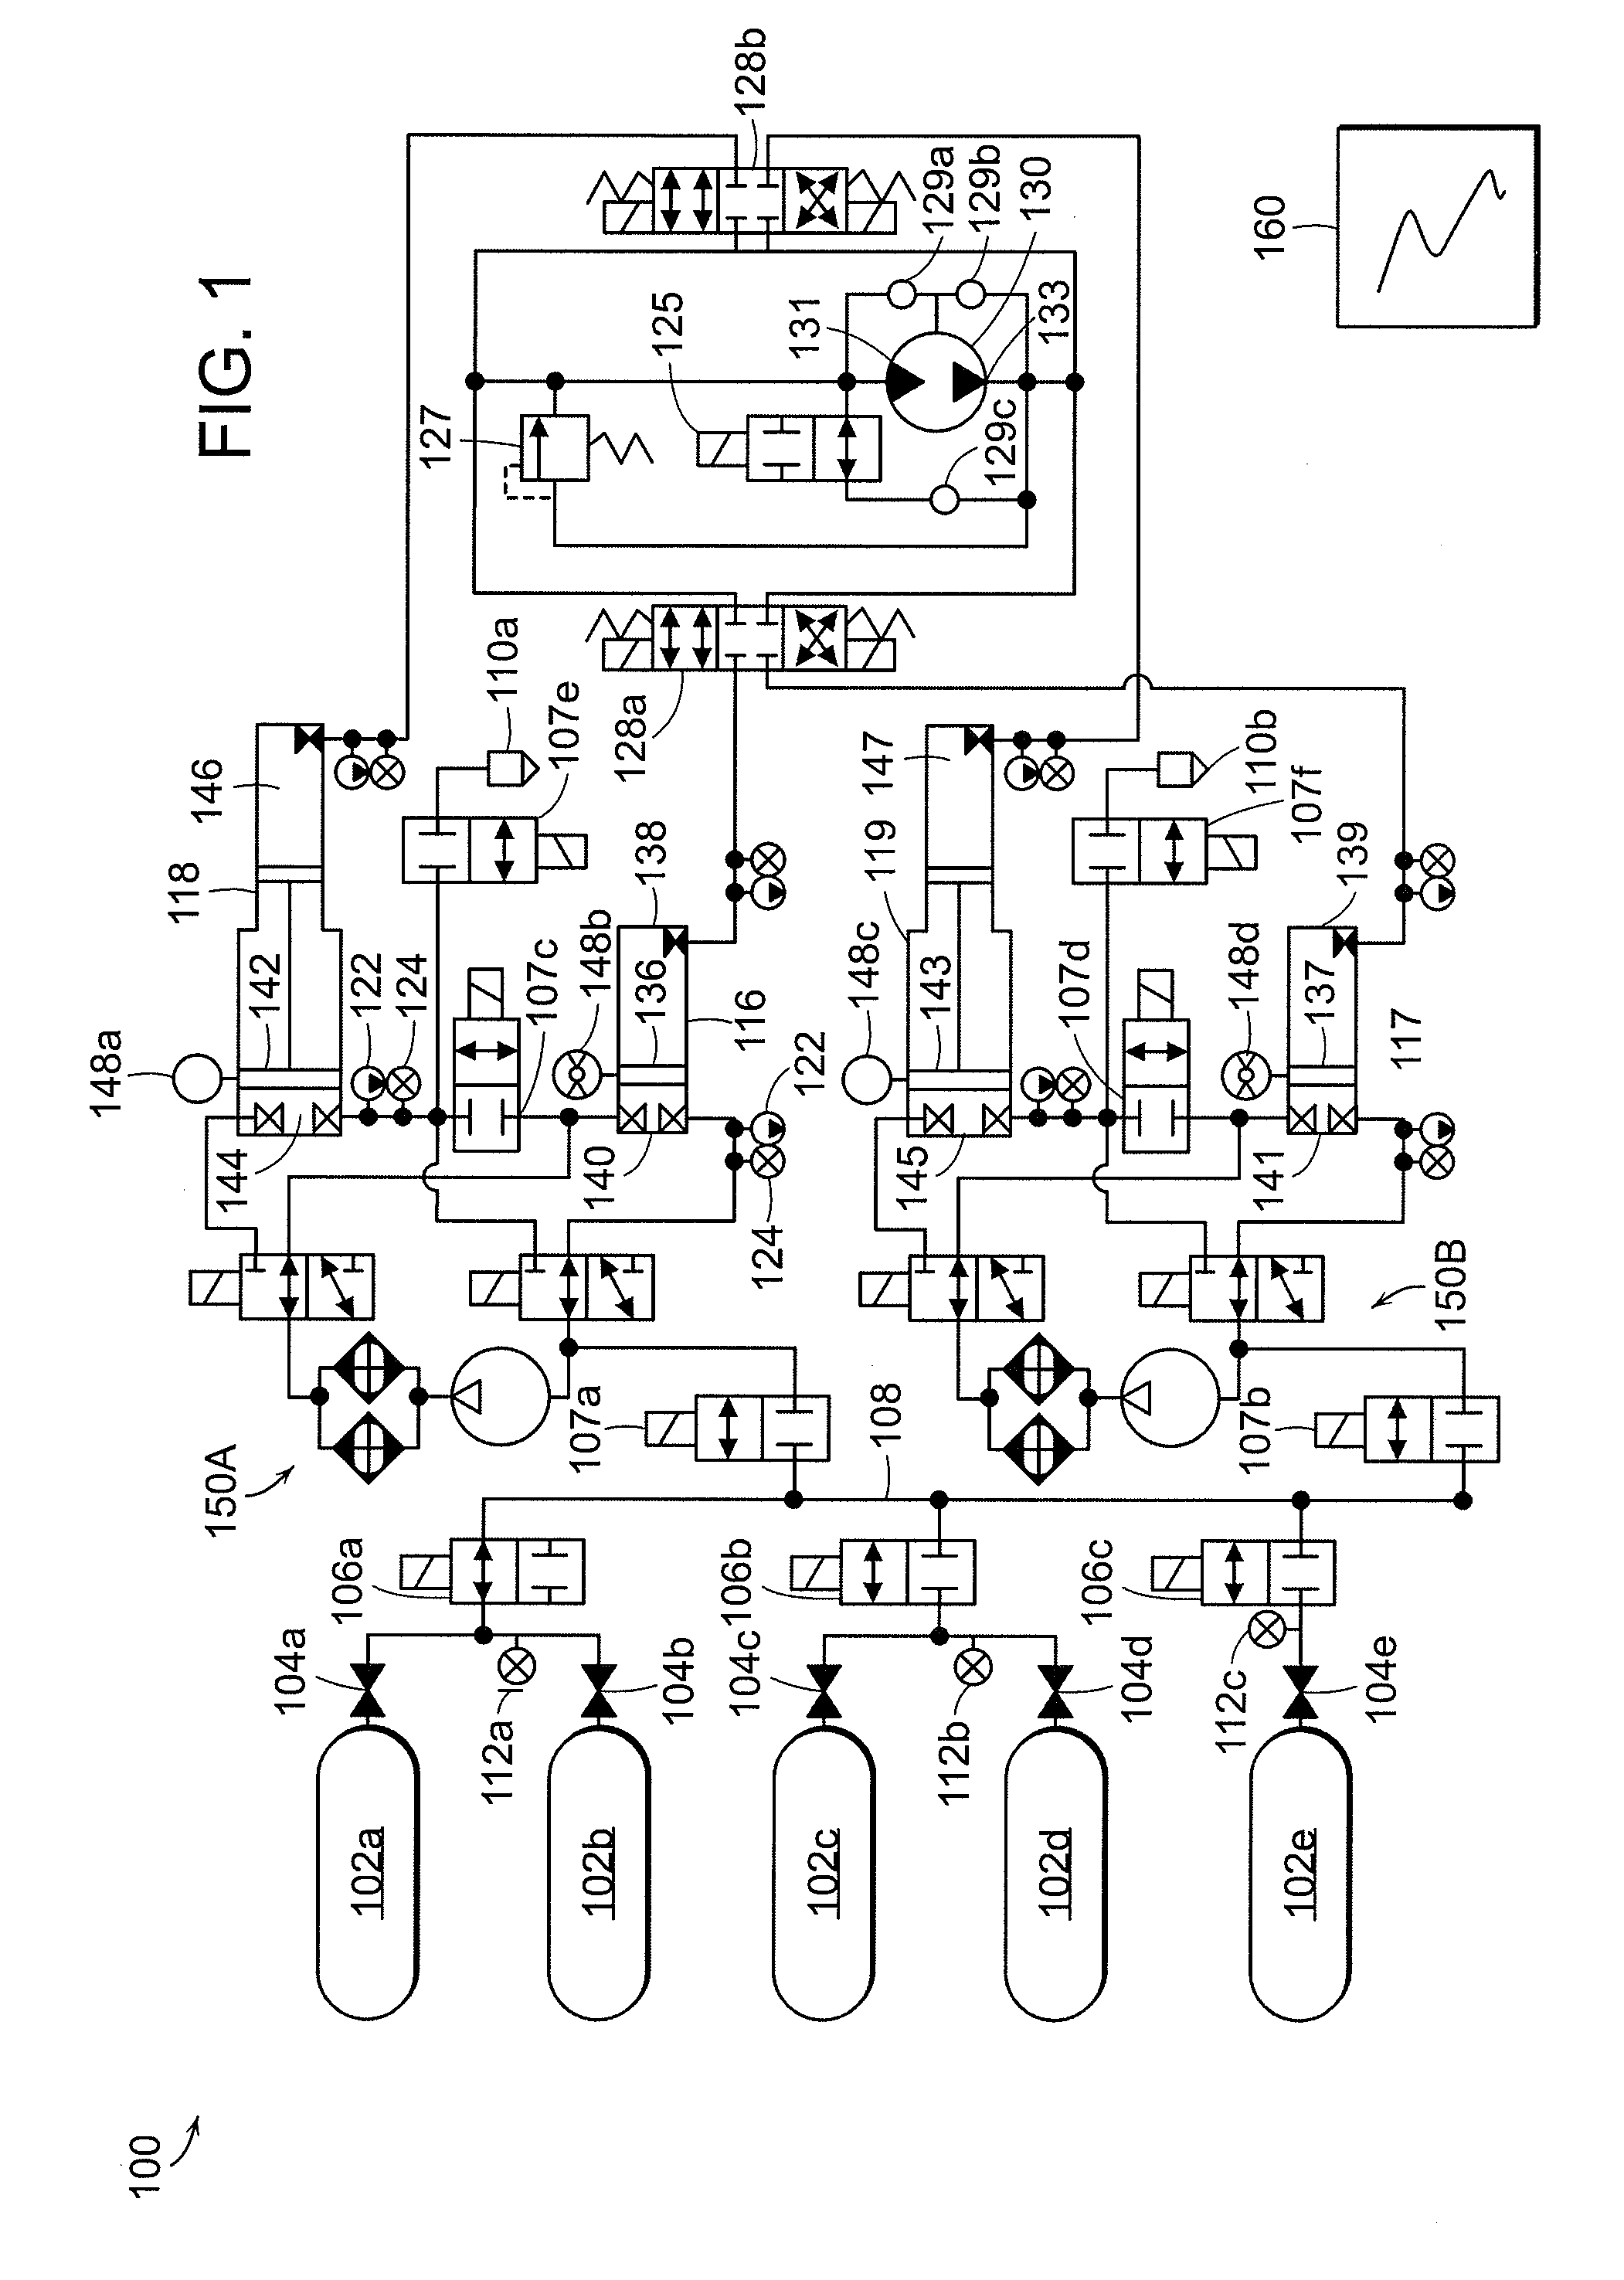 System and Method for Rapid Isothermal Gas Expansion and Compression for Energy Storage